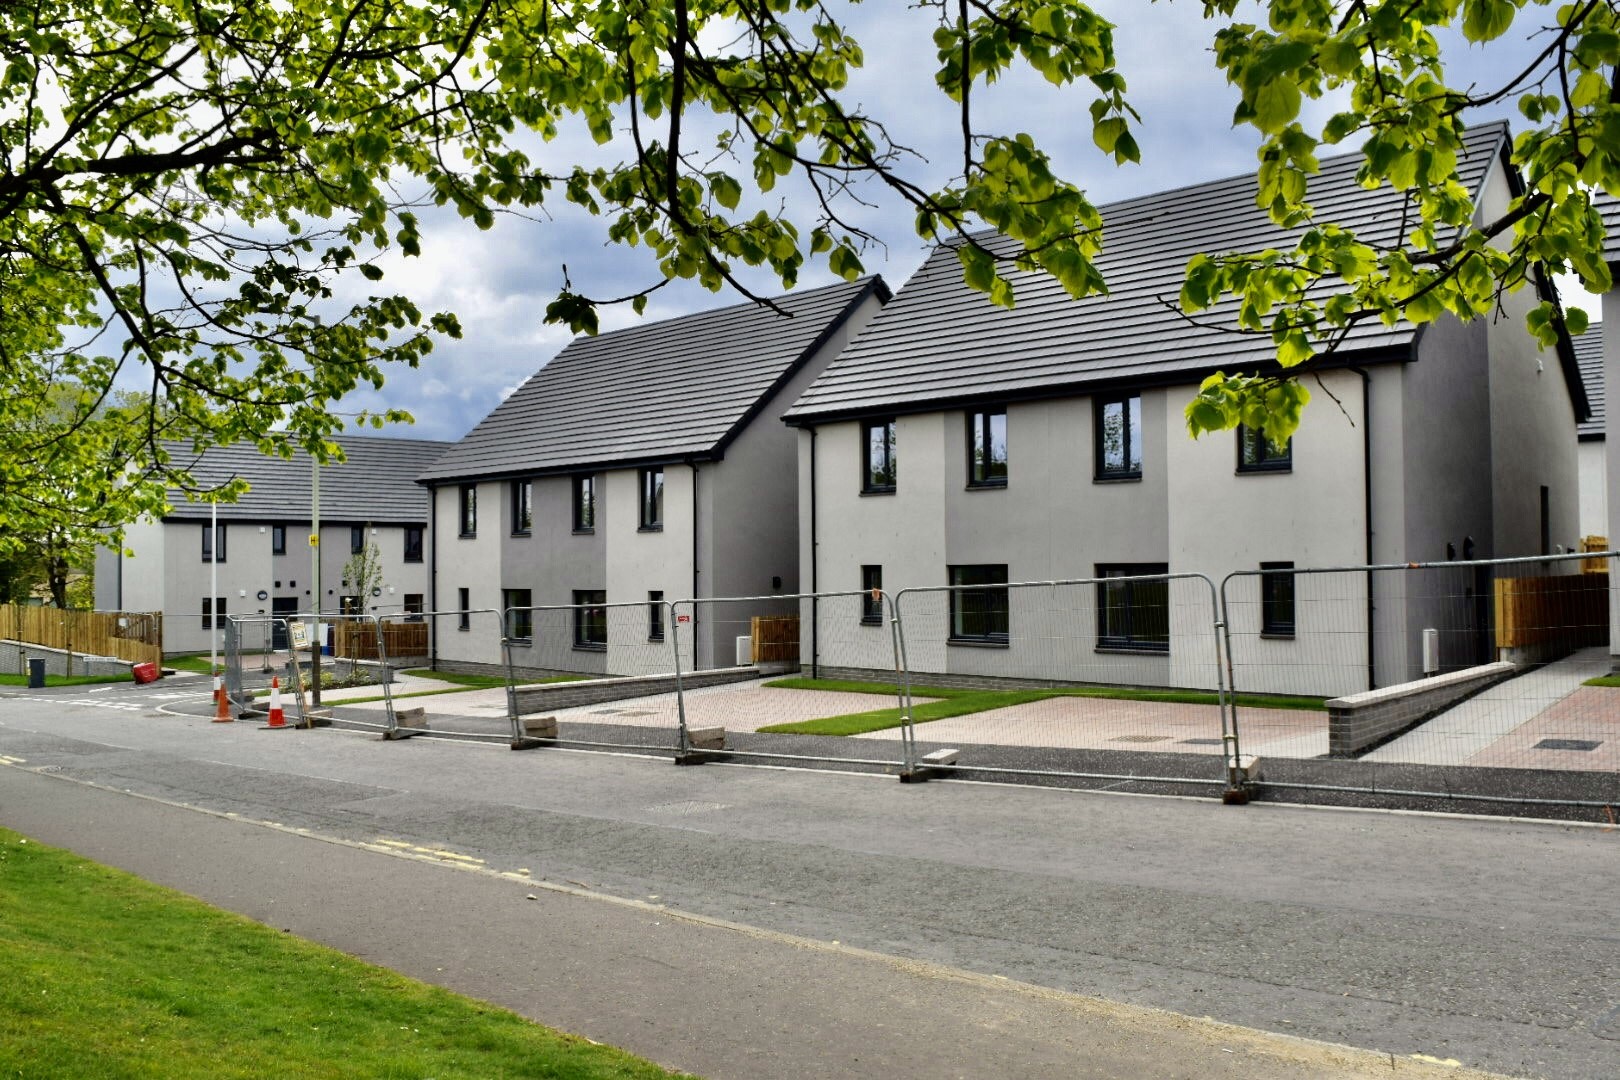 KnowESG_Caledonia Housing Association-s climate and sustainability strategy